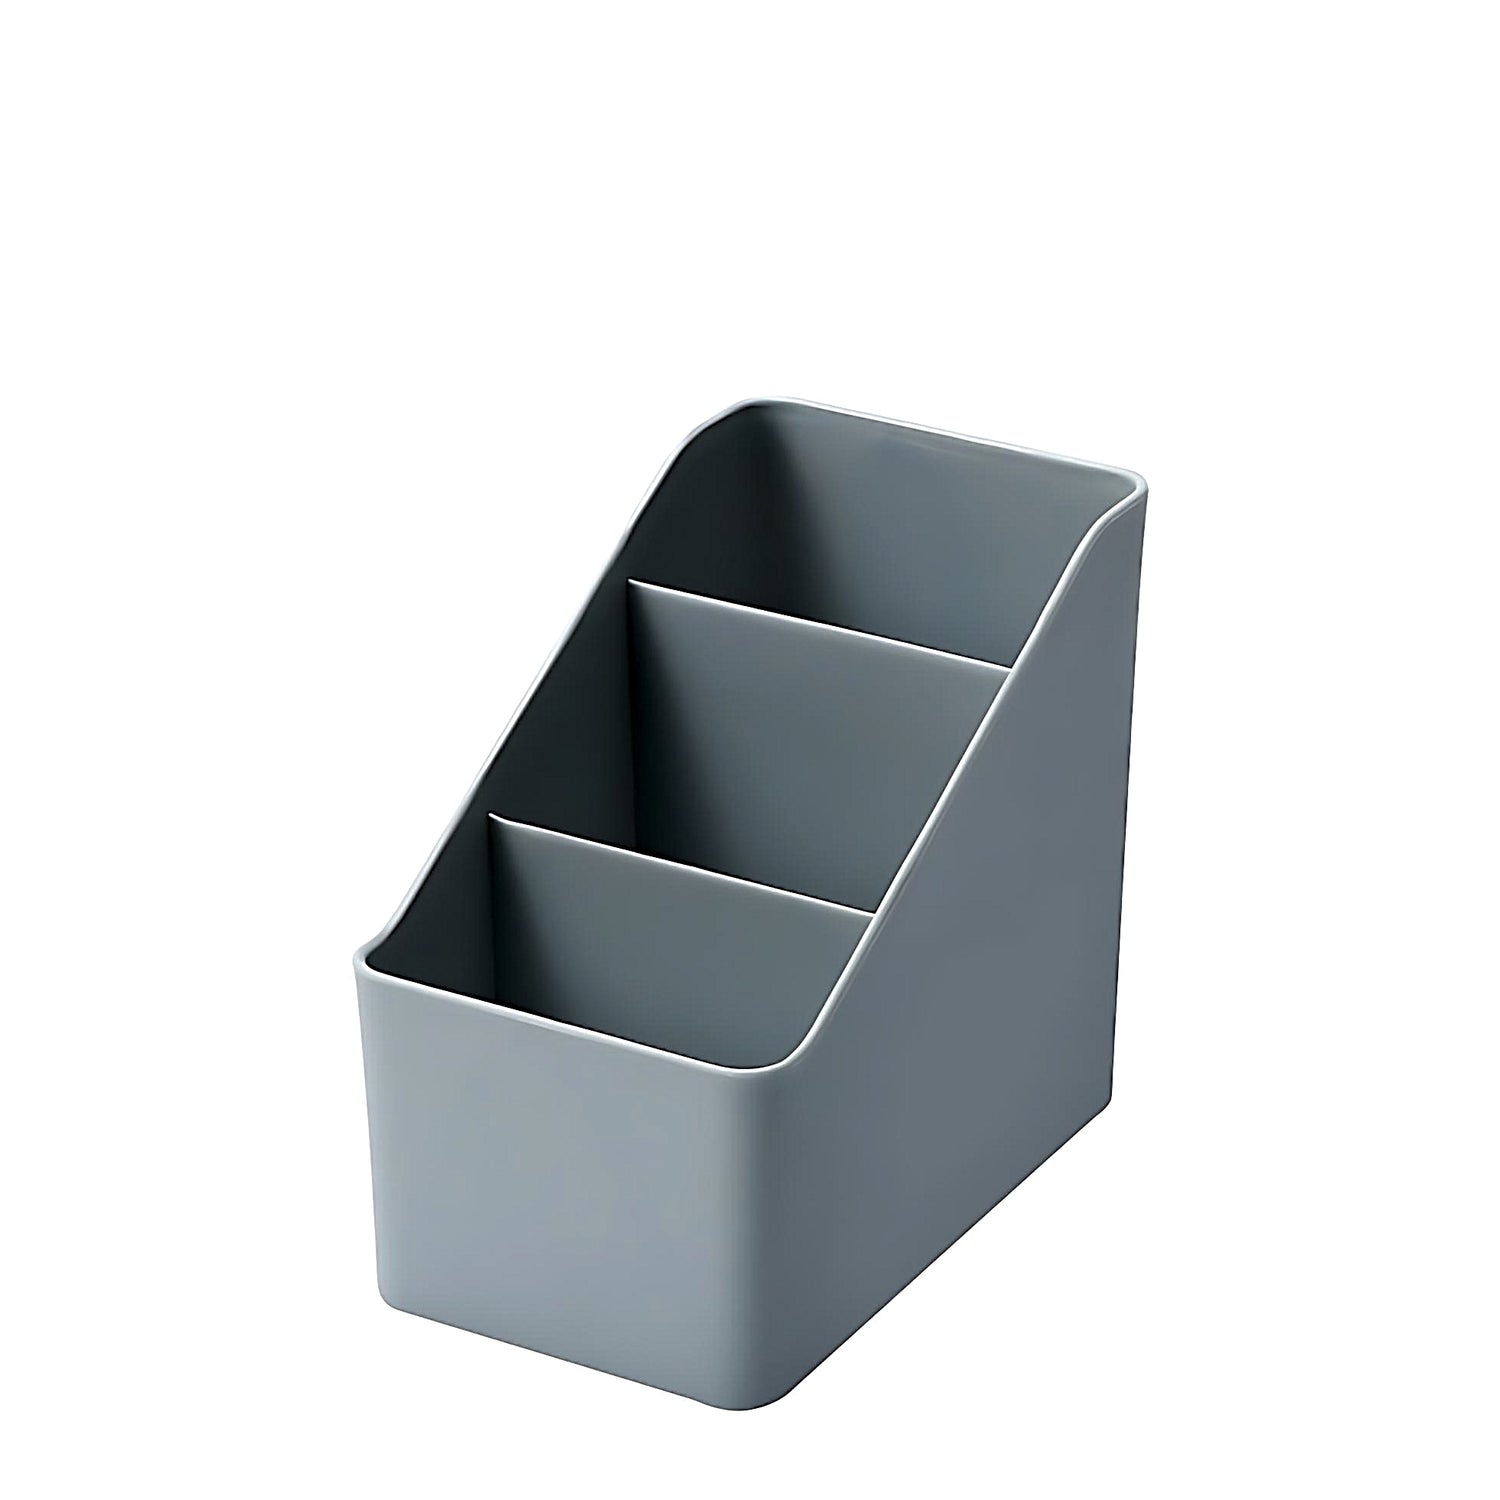 a grey desktop organizer with three compartments on a white background